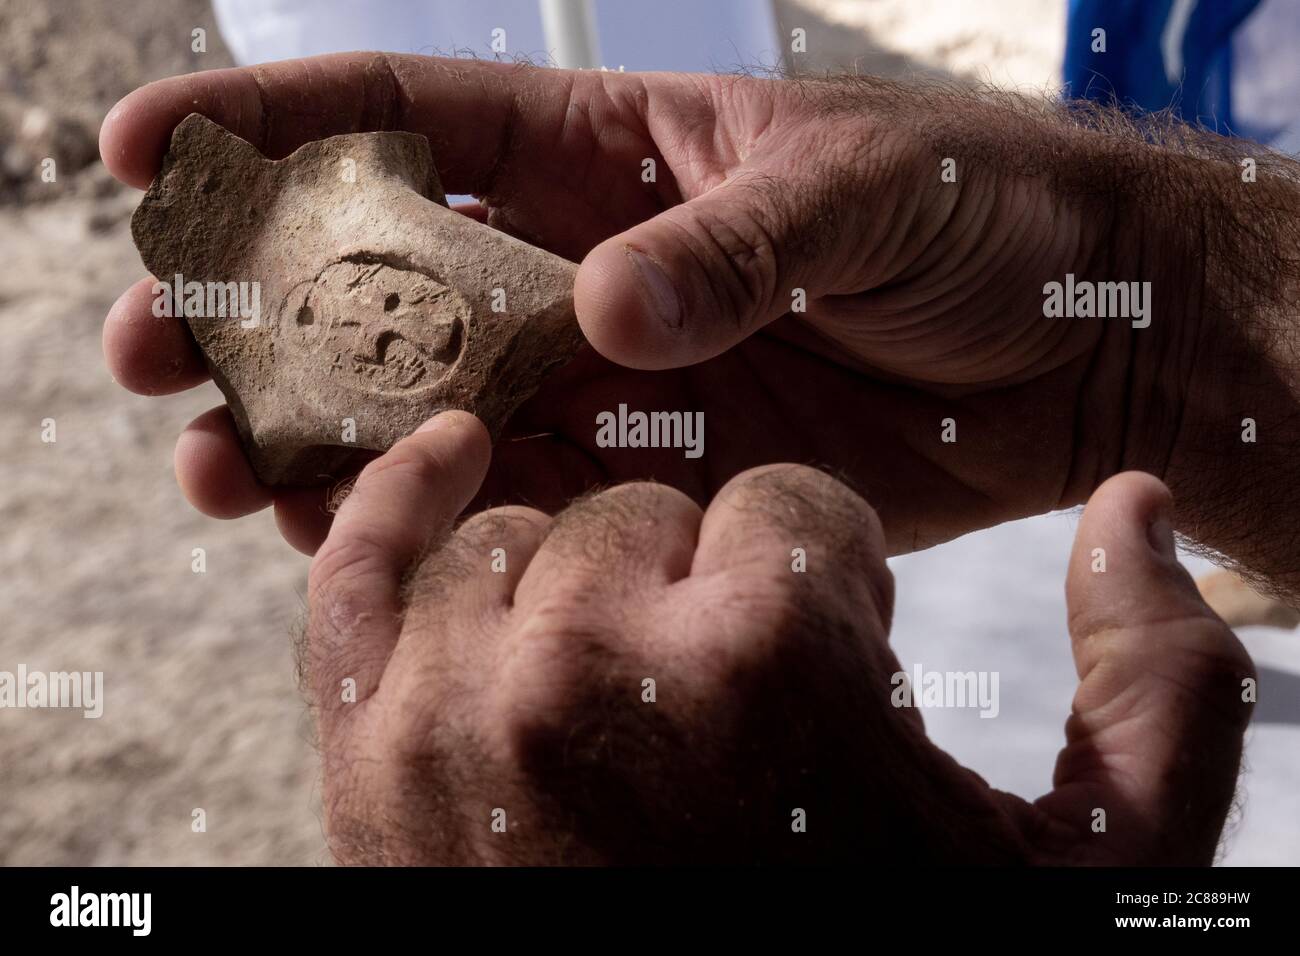 Jerusalem, Israel. 22nd July, 2020. Significant administrative center from the days of Kings Hezekiah and Menashe (8th century to middle of the 7th century BCE) was uncovered by the Israel Antiquities Authority in Jerusalem near the US Embassy. Over 120 seal impressions stamped on jars were found in the excavation, serving as evidence of tax collection in the period of the Judean monarchs, in one of the largest and most important collections uncovered in Israel. Credit: Nir Alon/Alamy Live News Stock Photo